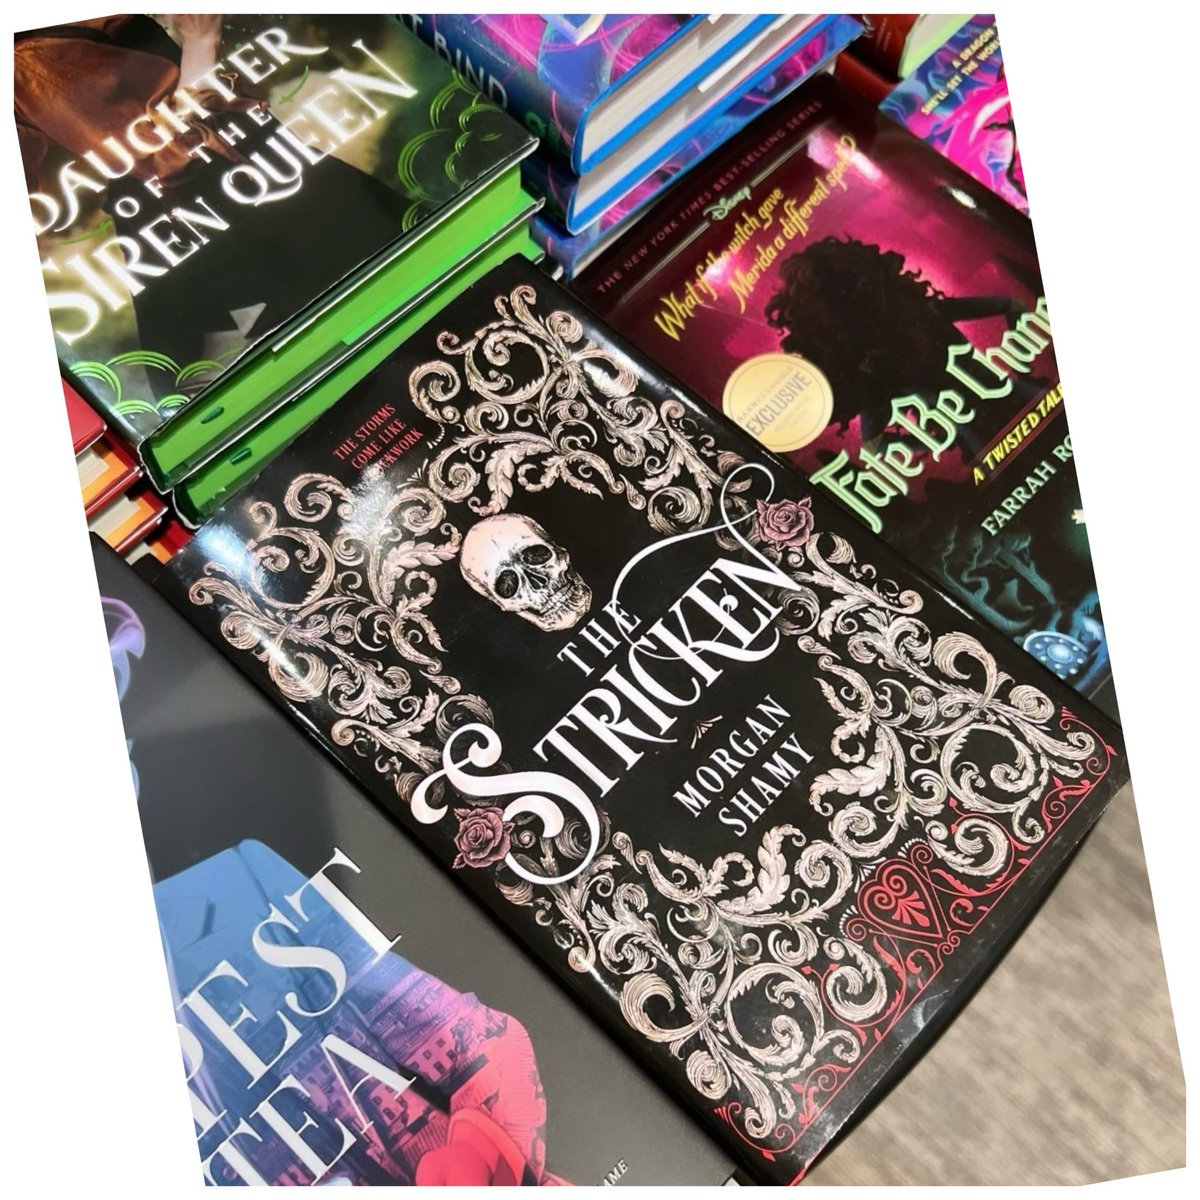 The Stricken spotted in the Algonquin, Illinois Barnes & Noble! A reader tagged me & said it was on the display table right as she walked in! It still blows my mind that this book is out there in the wild!! 🥹🙌💀🔥🎉🖤